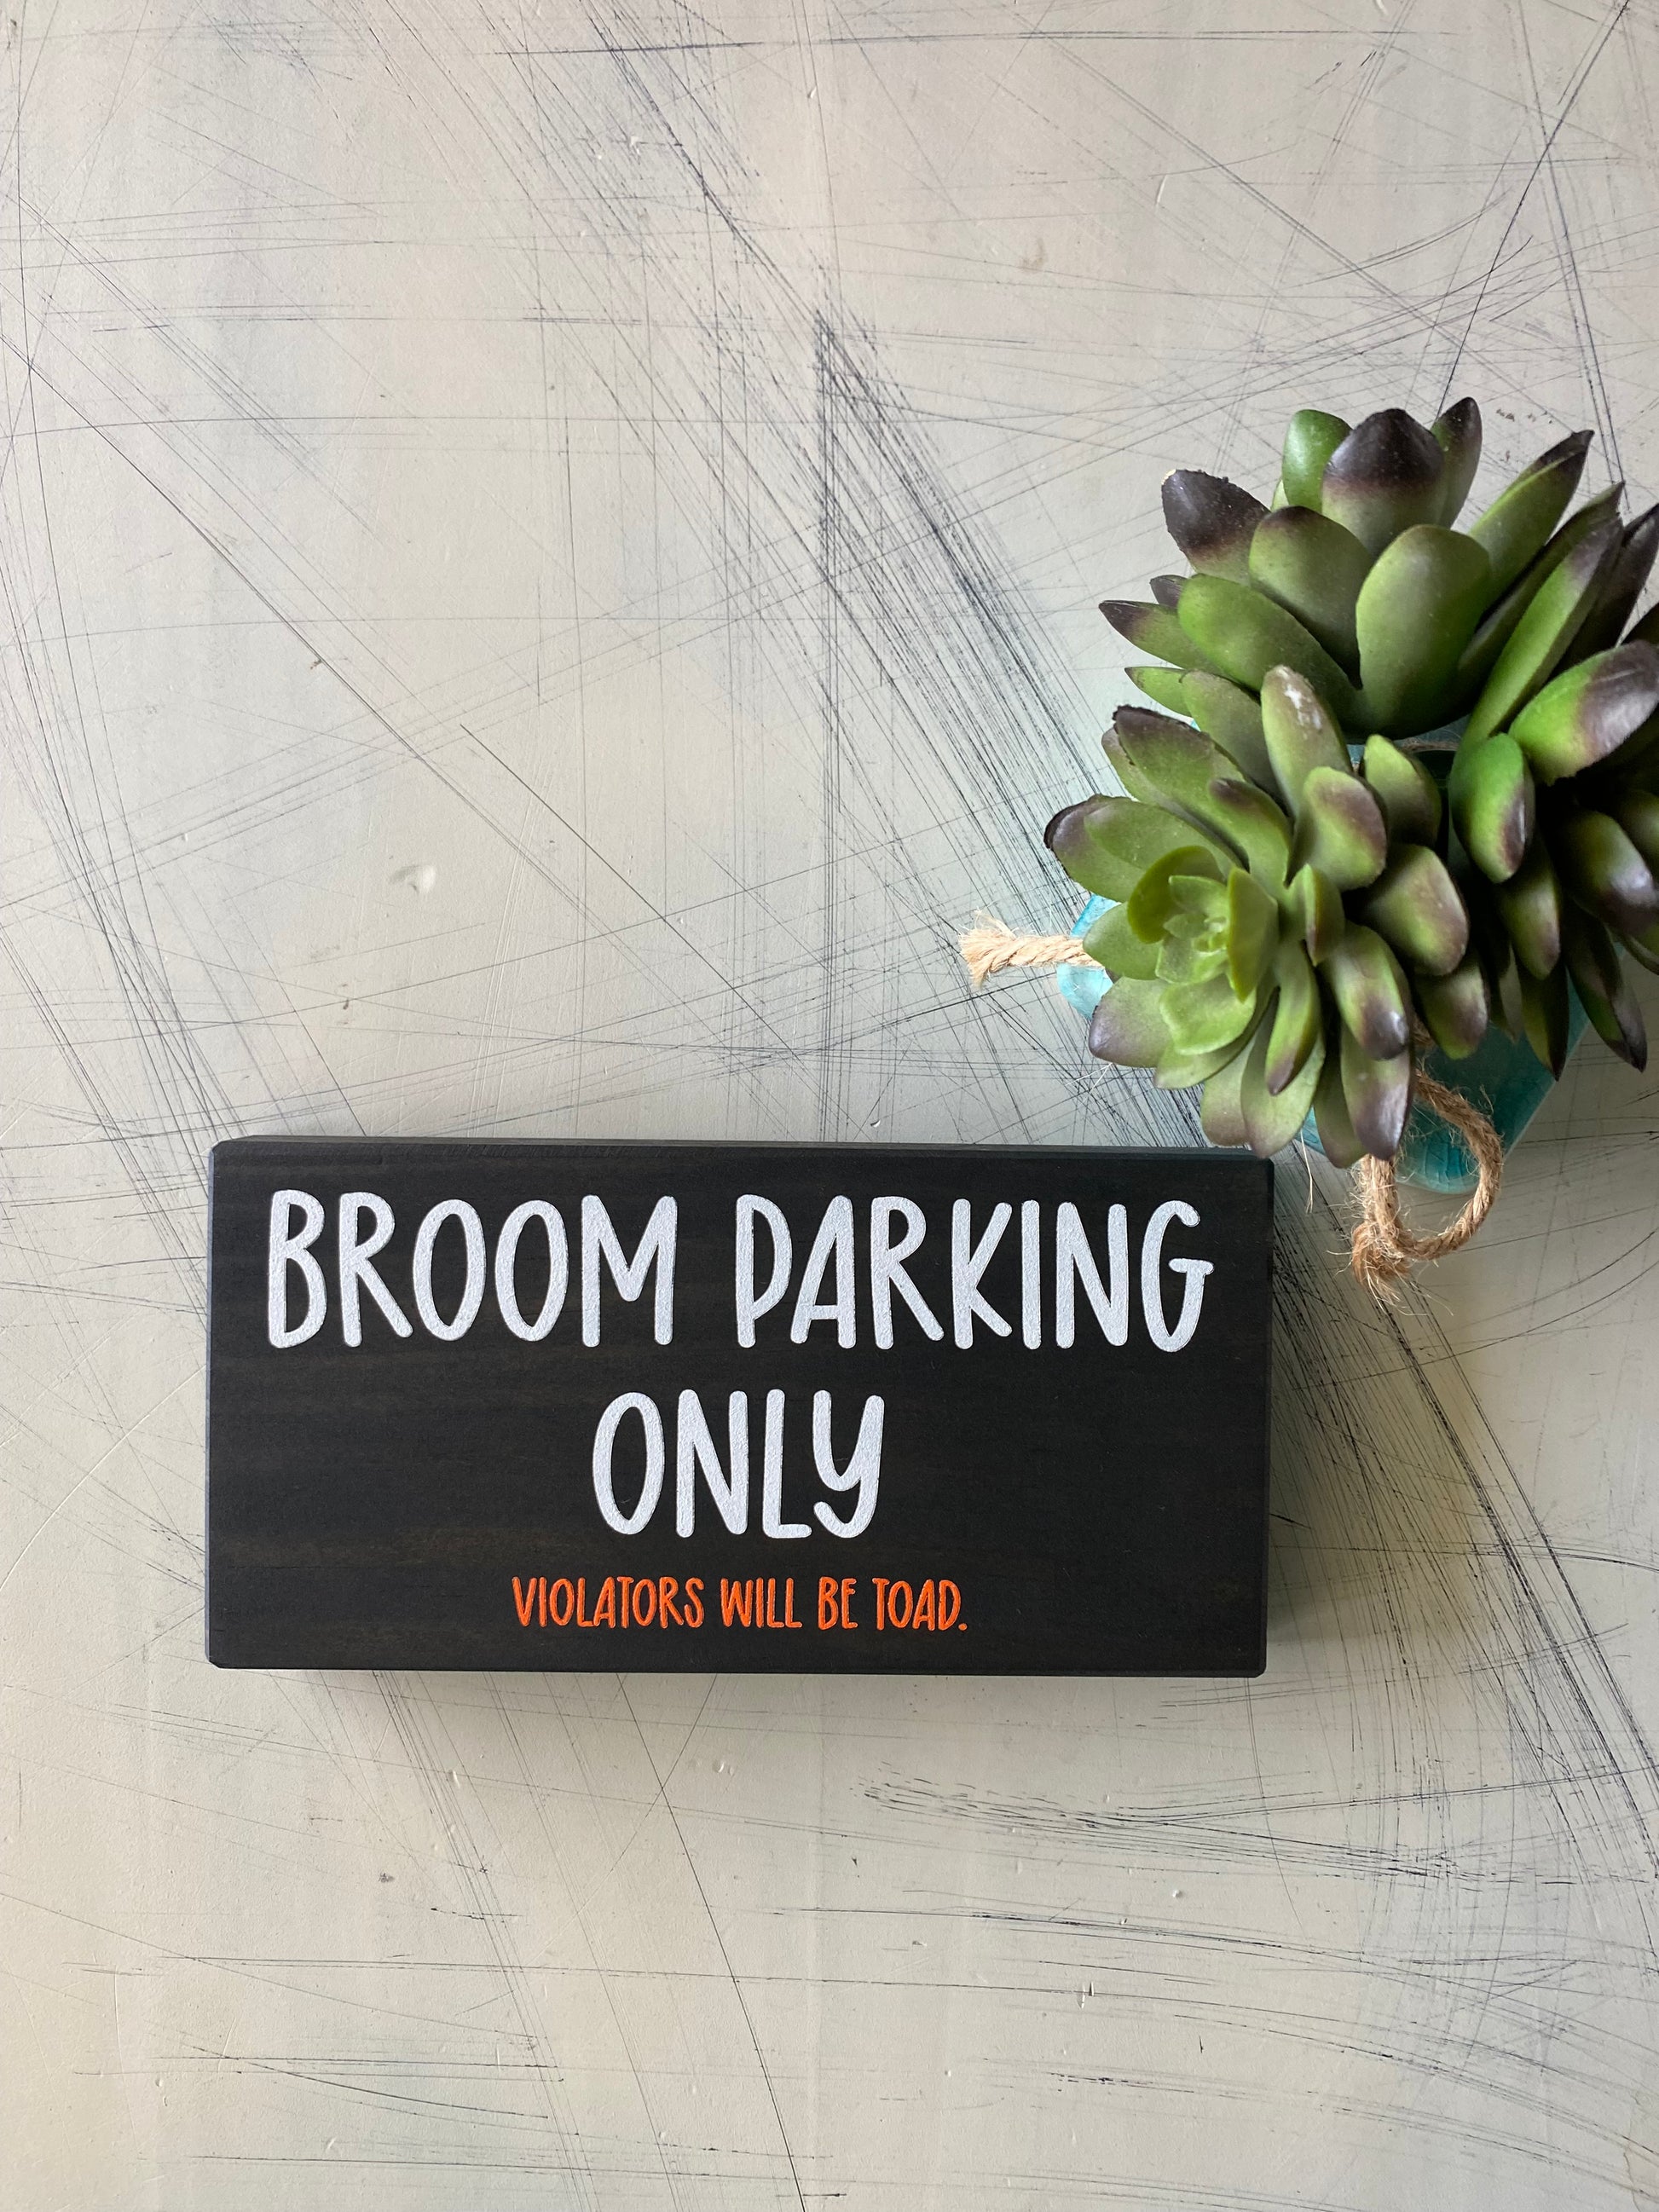 Broom Parking Only - Violators will be Toad. - Handmade mini wood sign